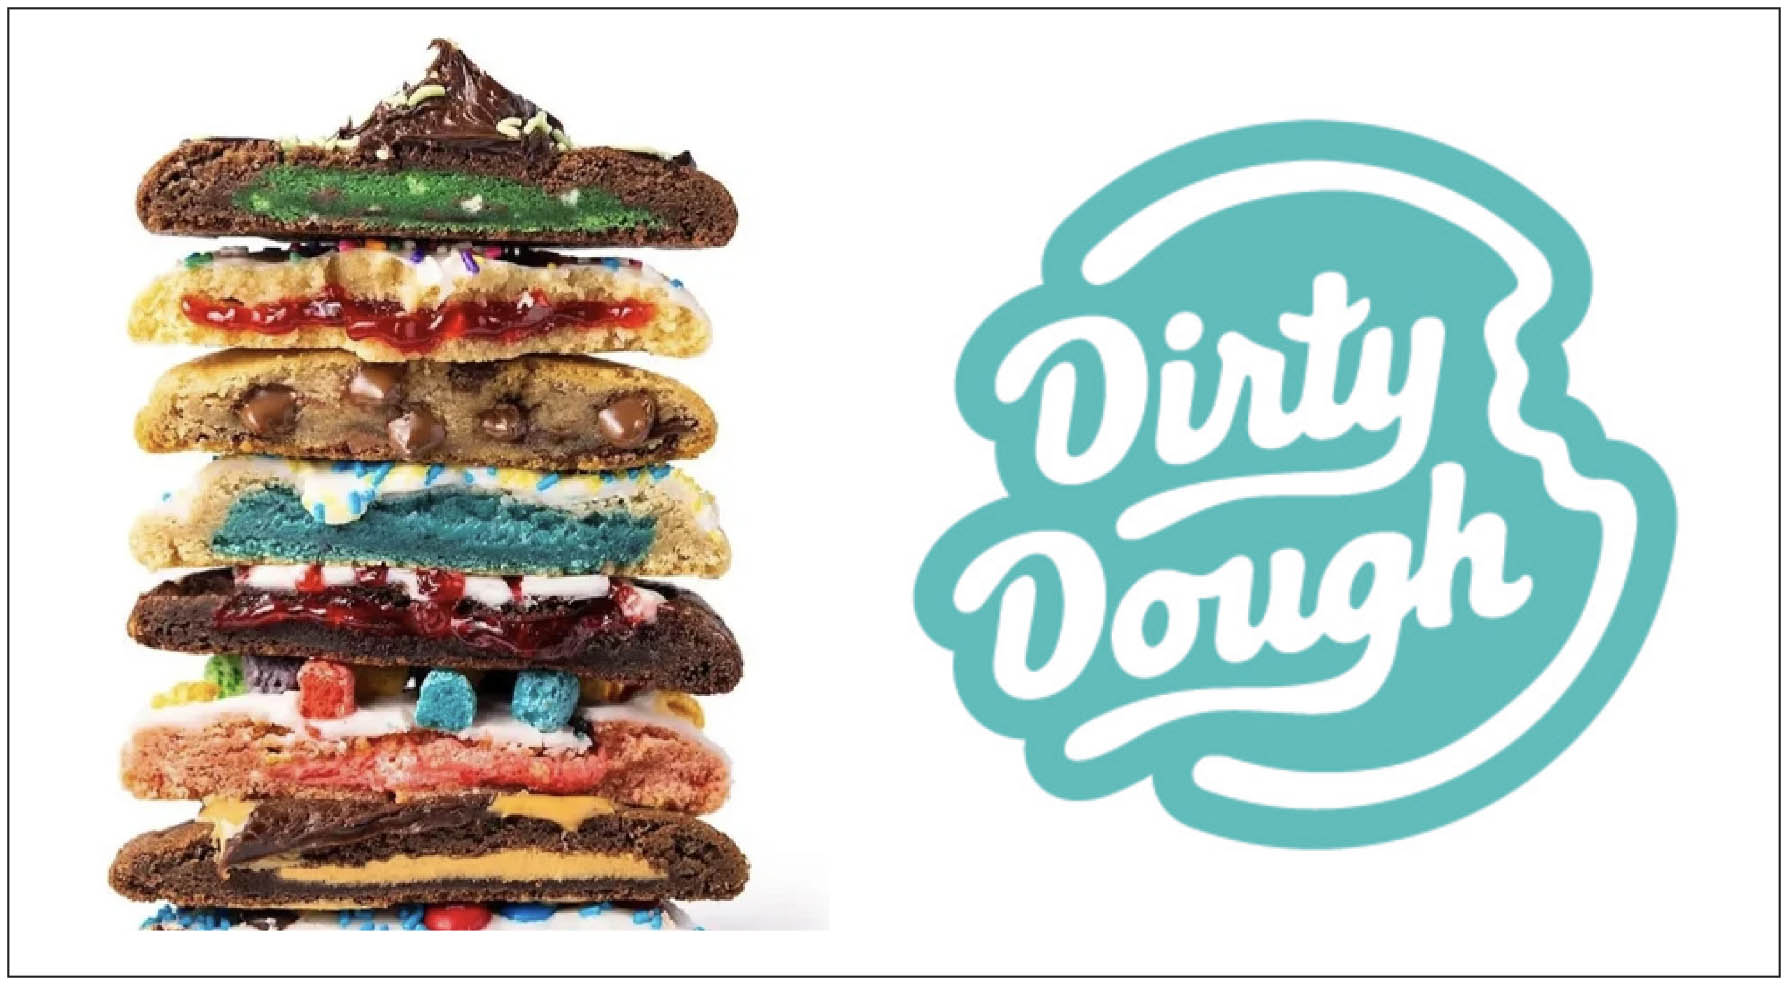 Dirty Dough Cookies Plans 8 New Locations in Houston Area Retail & Restaurant Facility Business